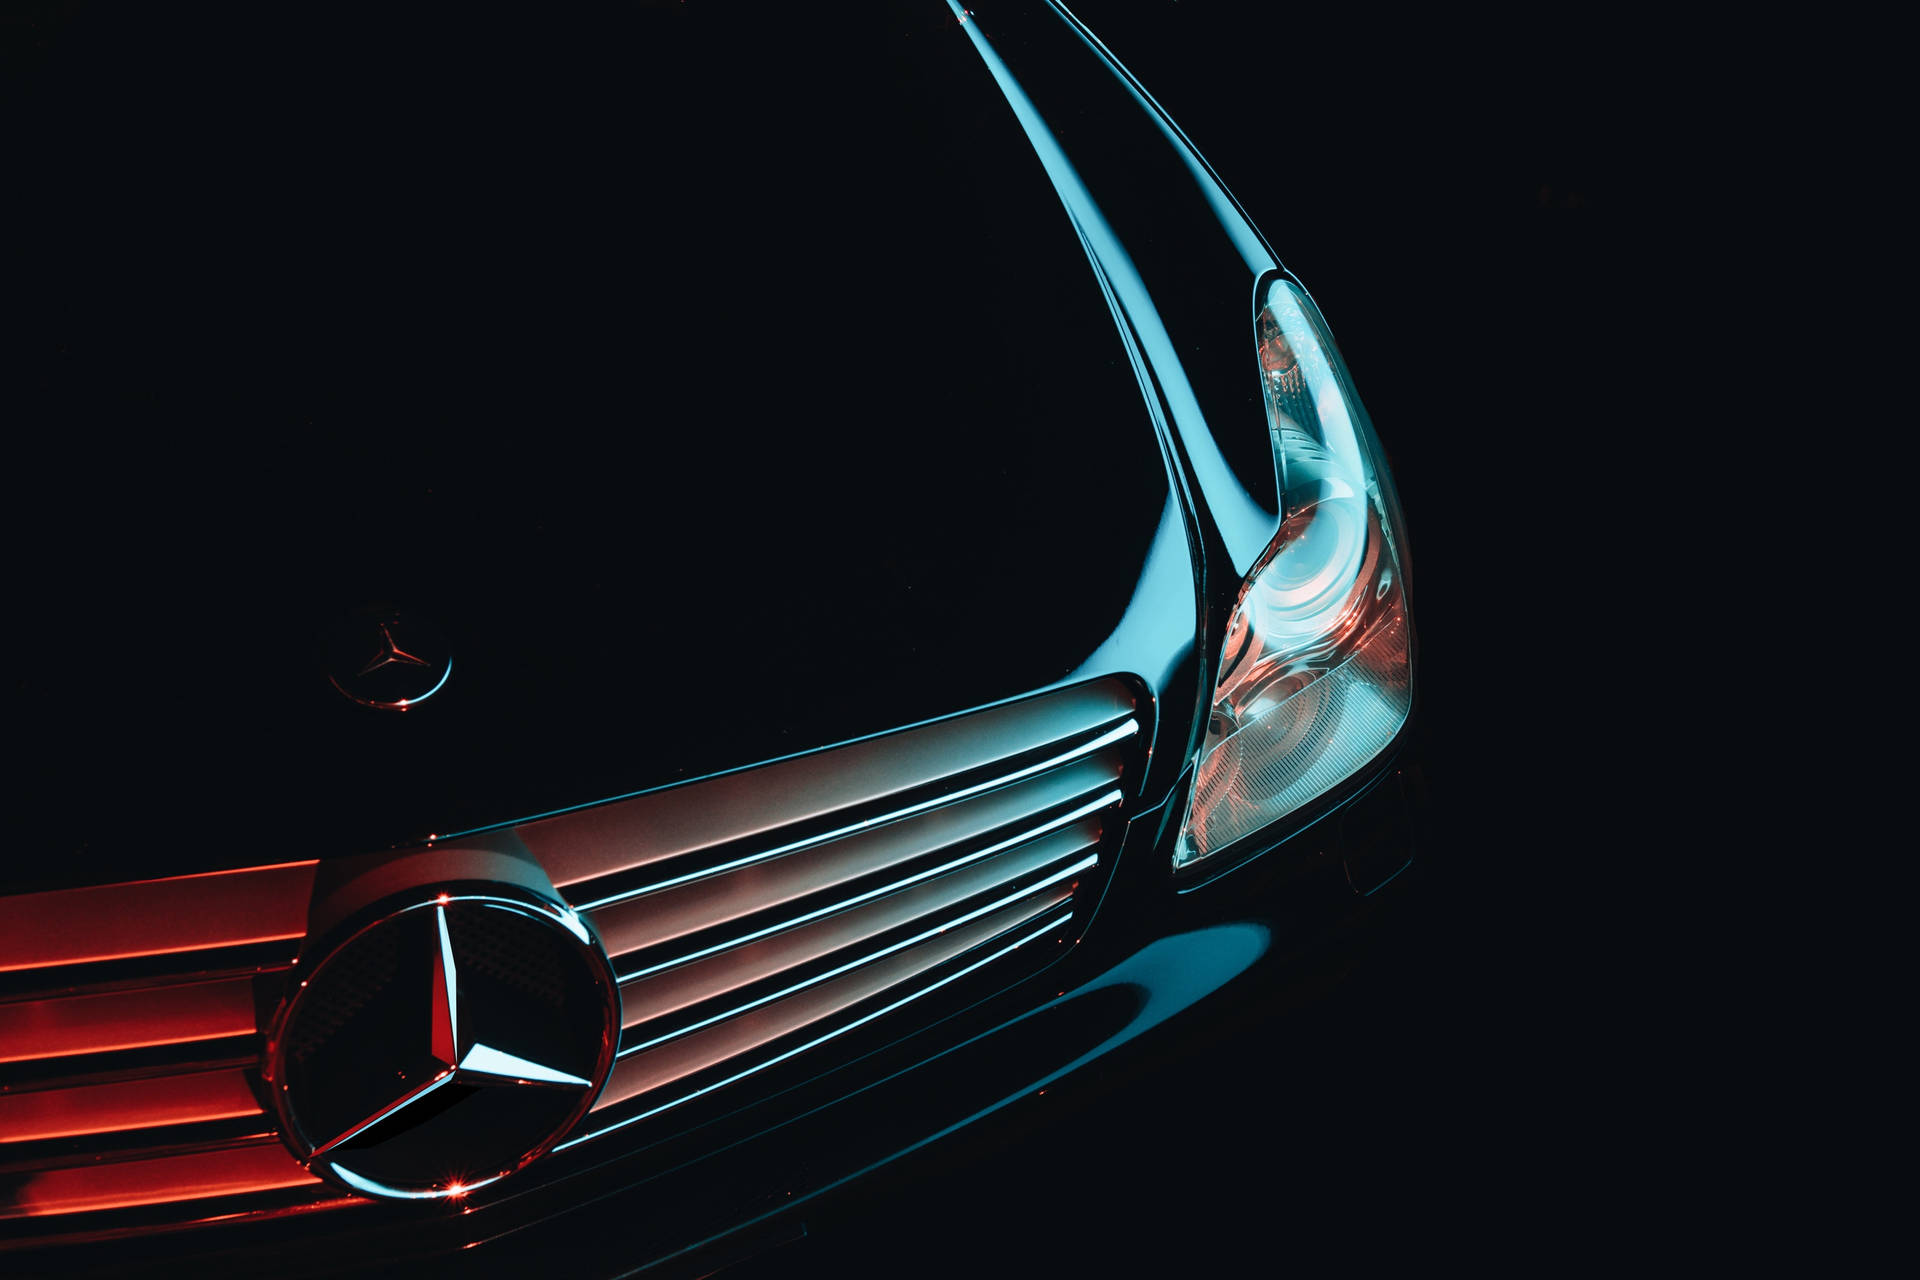 Mercedes 3072X2048 Wallpaper and Background Image